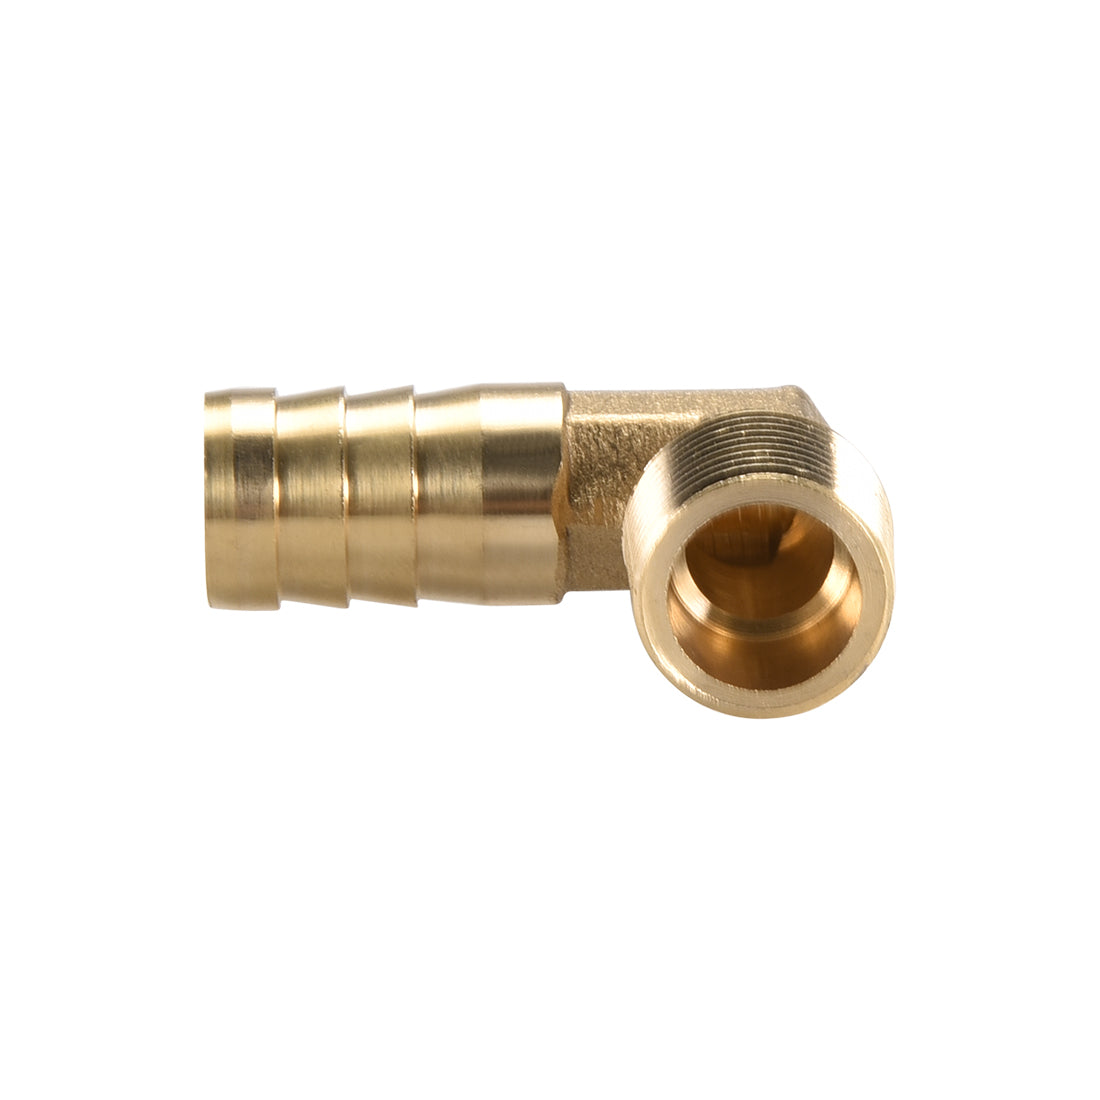 Uxcell Uxcell Brass Barb Hose Fitting 90 Degree Elbow 6mm Barbed x 3/8 PT Male Pipe